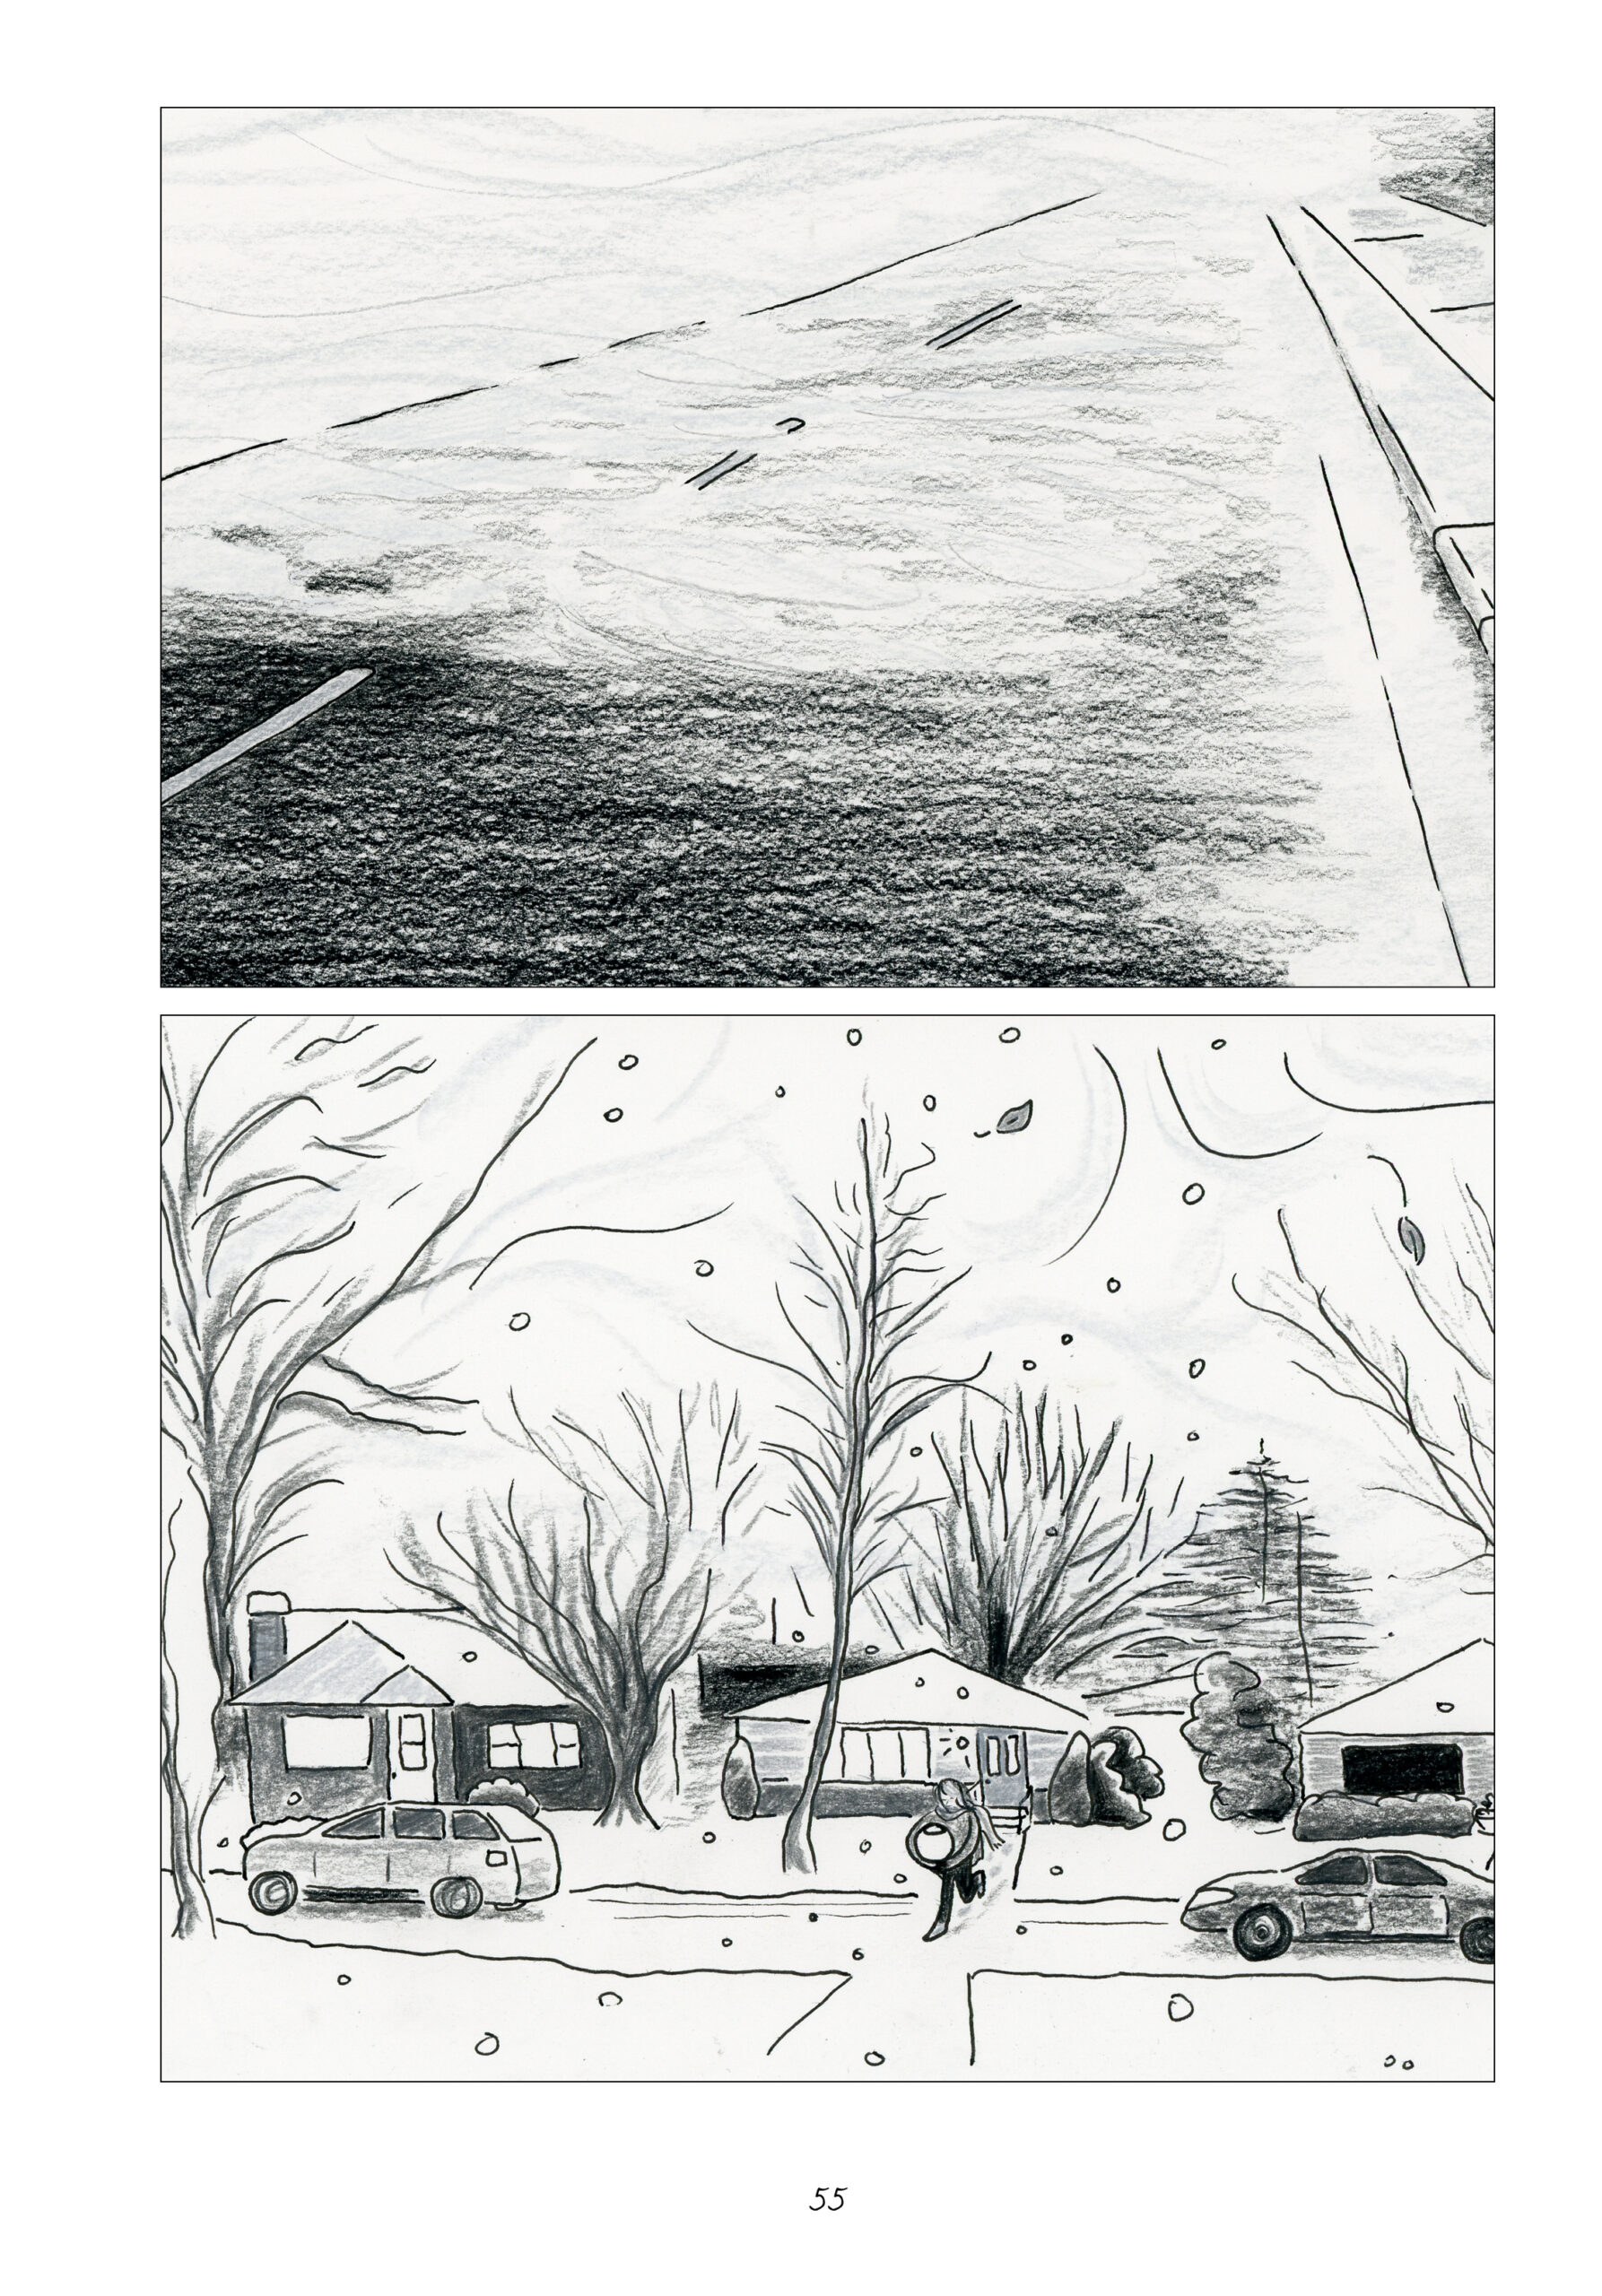 Again, two black and white panels each take up half the page. The first is a road, split down the middle with a broken line. To the right of the road is a sidewalk. Then we see an establishing shot of a neighborhood street in winter. Two cars are parked on the road. There are three houses in the background, each with a white roof. The front yards are also white, presumably from the snow. Trees dot the front and back yards; most have lost their leaves. Lynn, in a long sleeve shirt, scarf, black pants, and boots, is headed toward the road. She holds something large and round in her arms. 